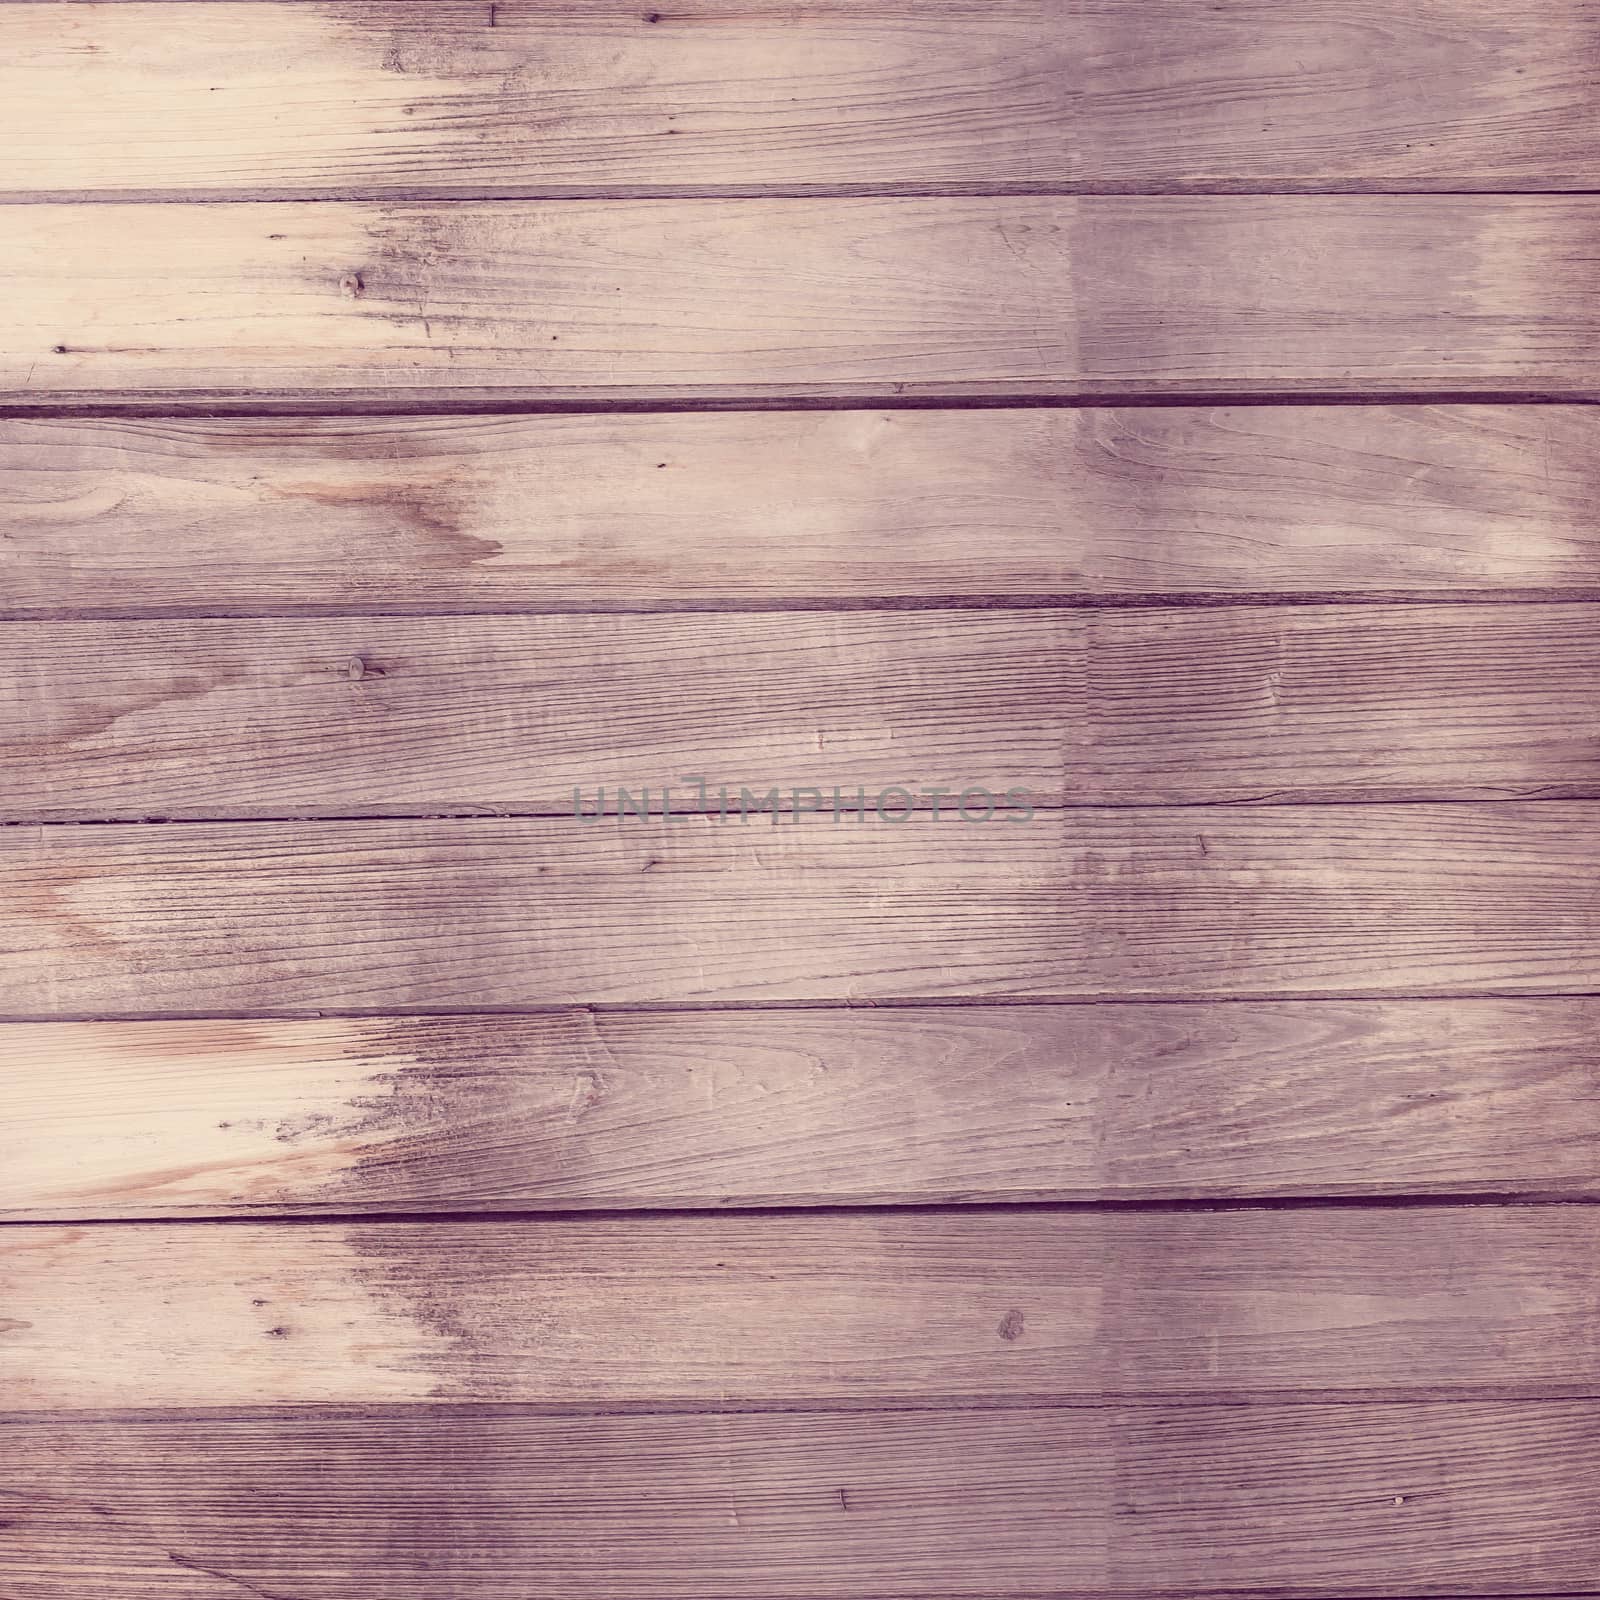 Pink vintage wood plank wall texture background by nopparats